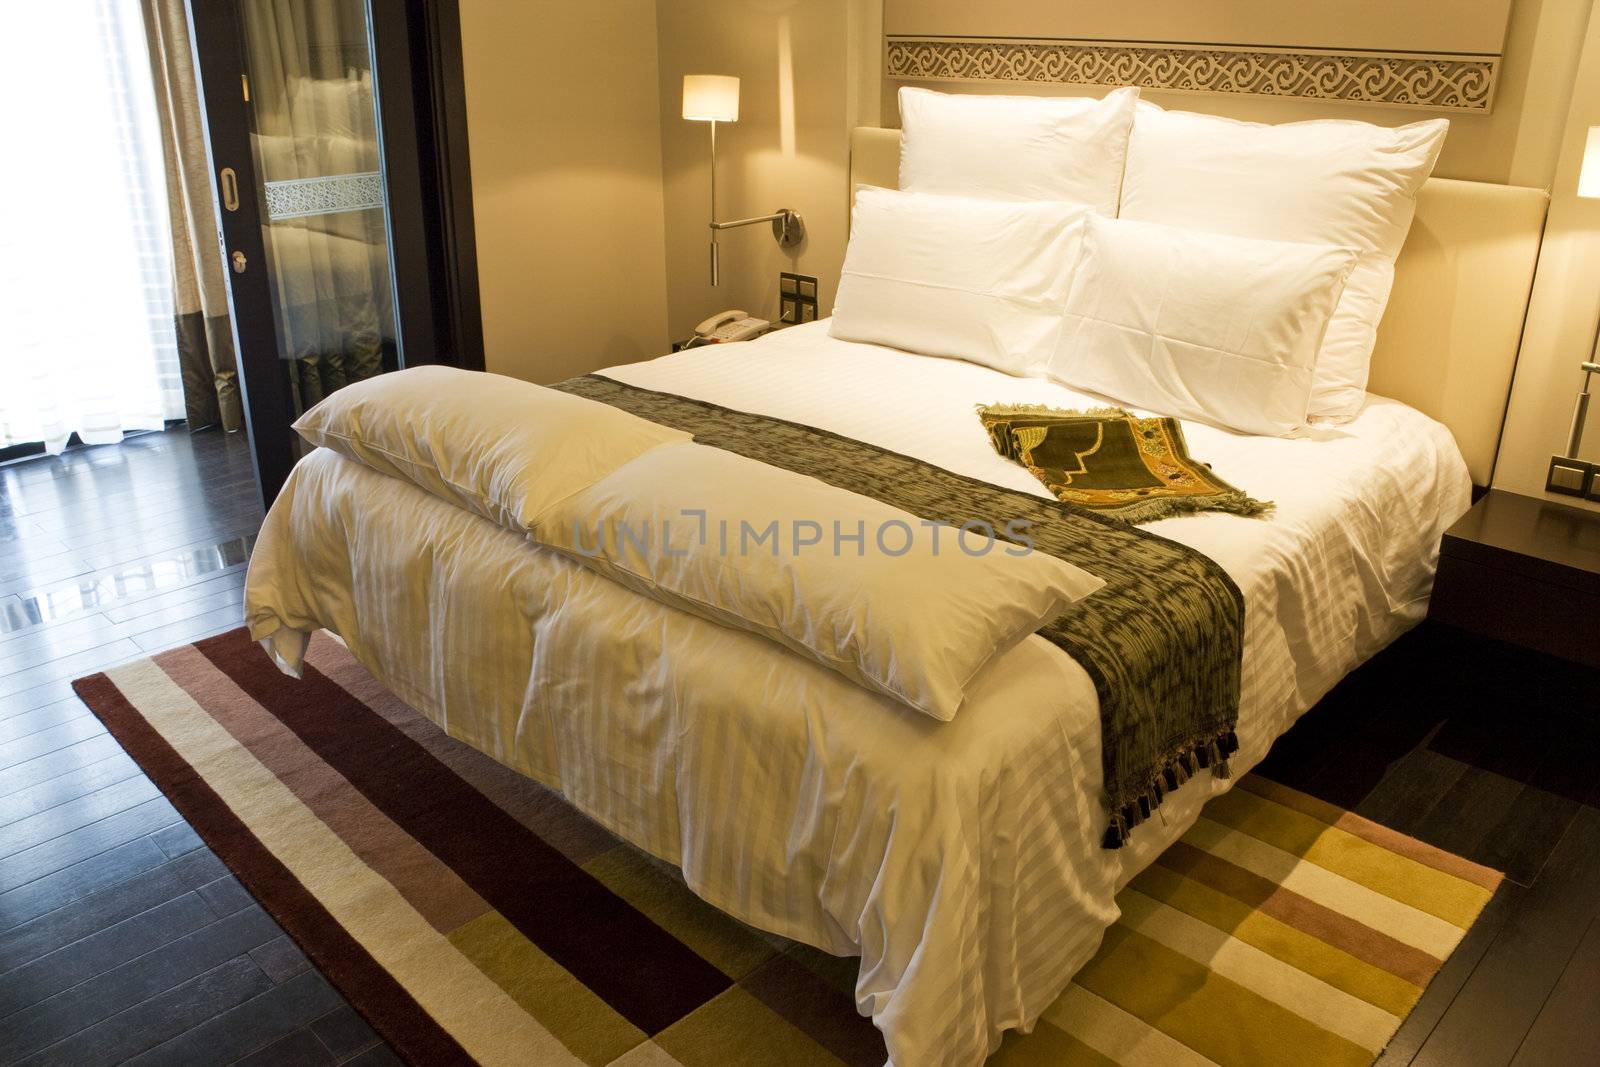 Image of a luxurious bed.
